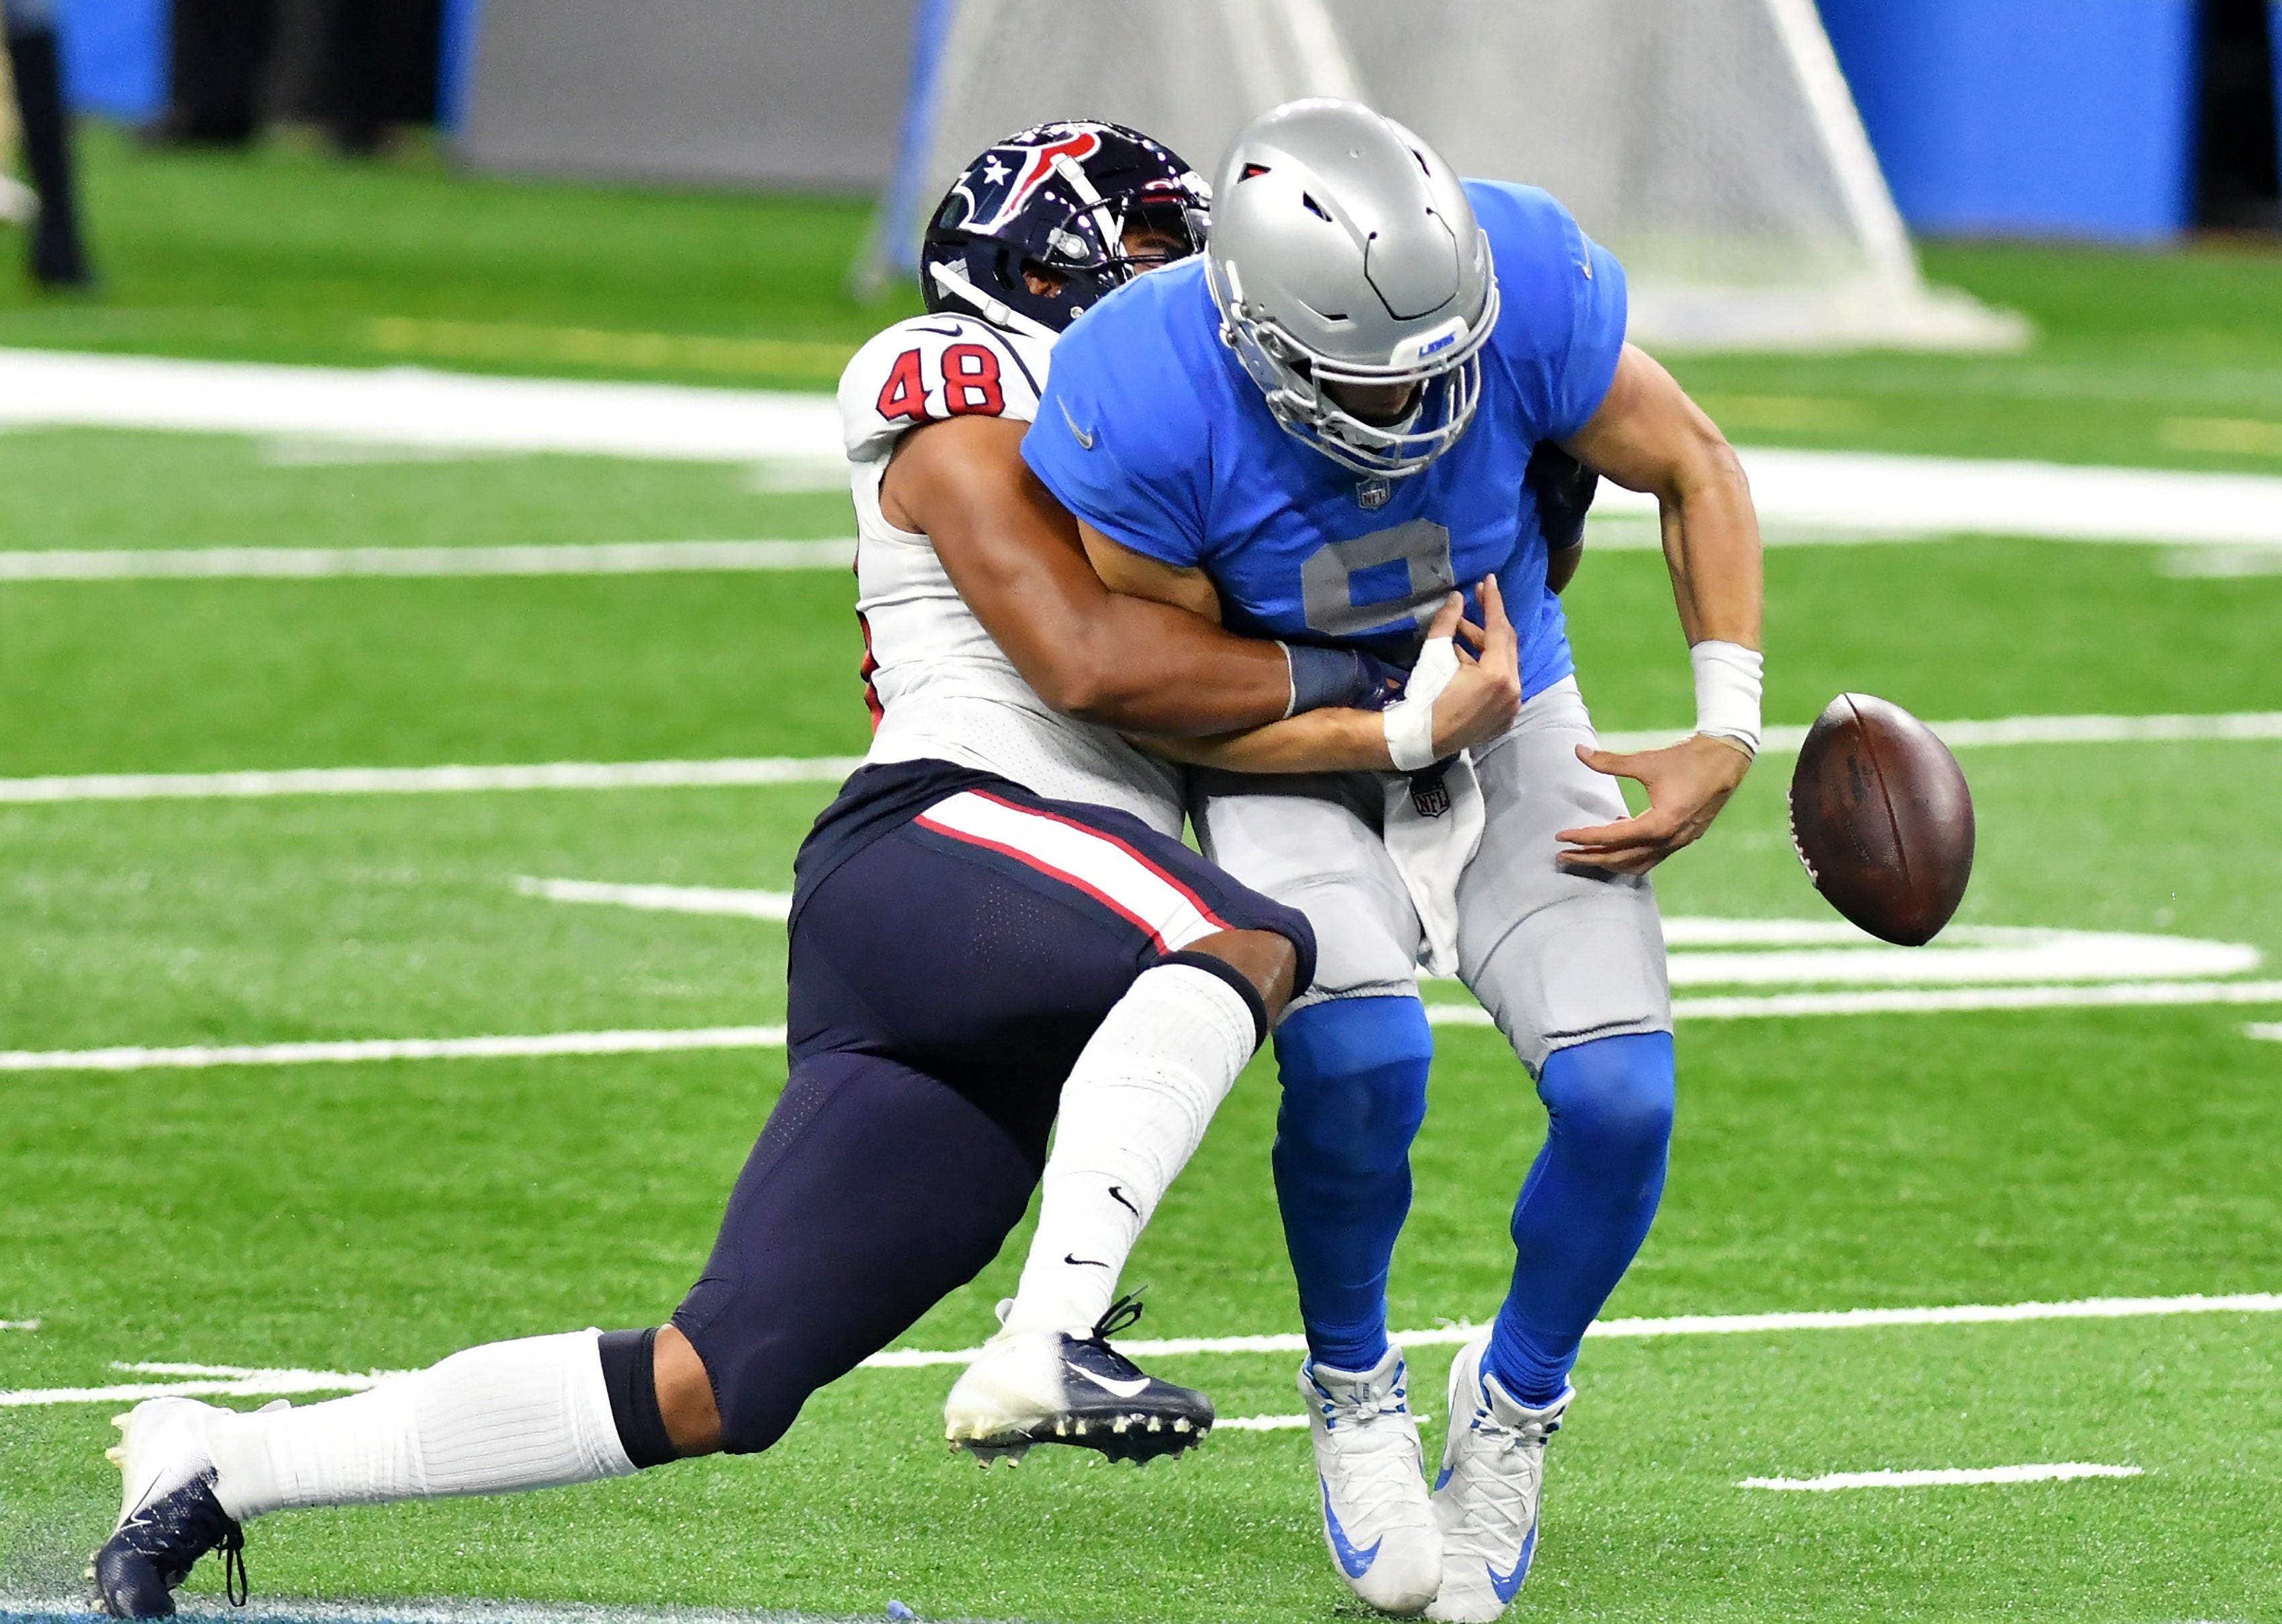 Texans linebacker Nate Hall (48) knocks the ball away from Lions quarterback Matthew Stafford (9) in the fourth quarter.  Detroit Lions vs Houston Texans on Thanksgiving Day at Ford Field in Detroit on Nov. 26, 2020.  Texans win 41-25.